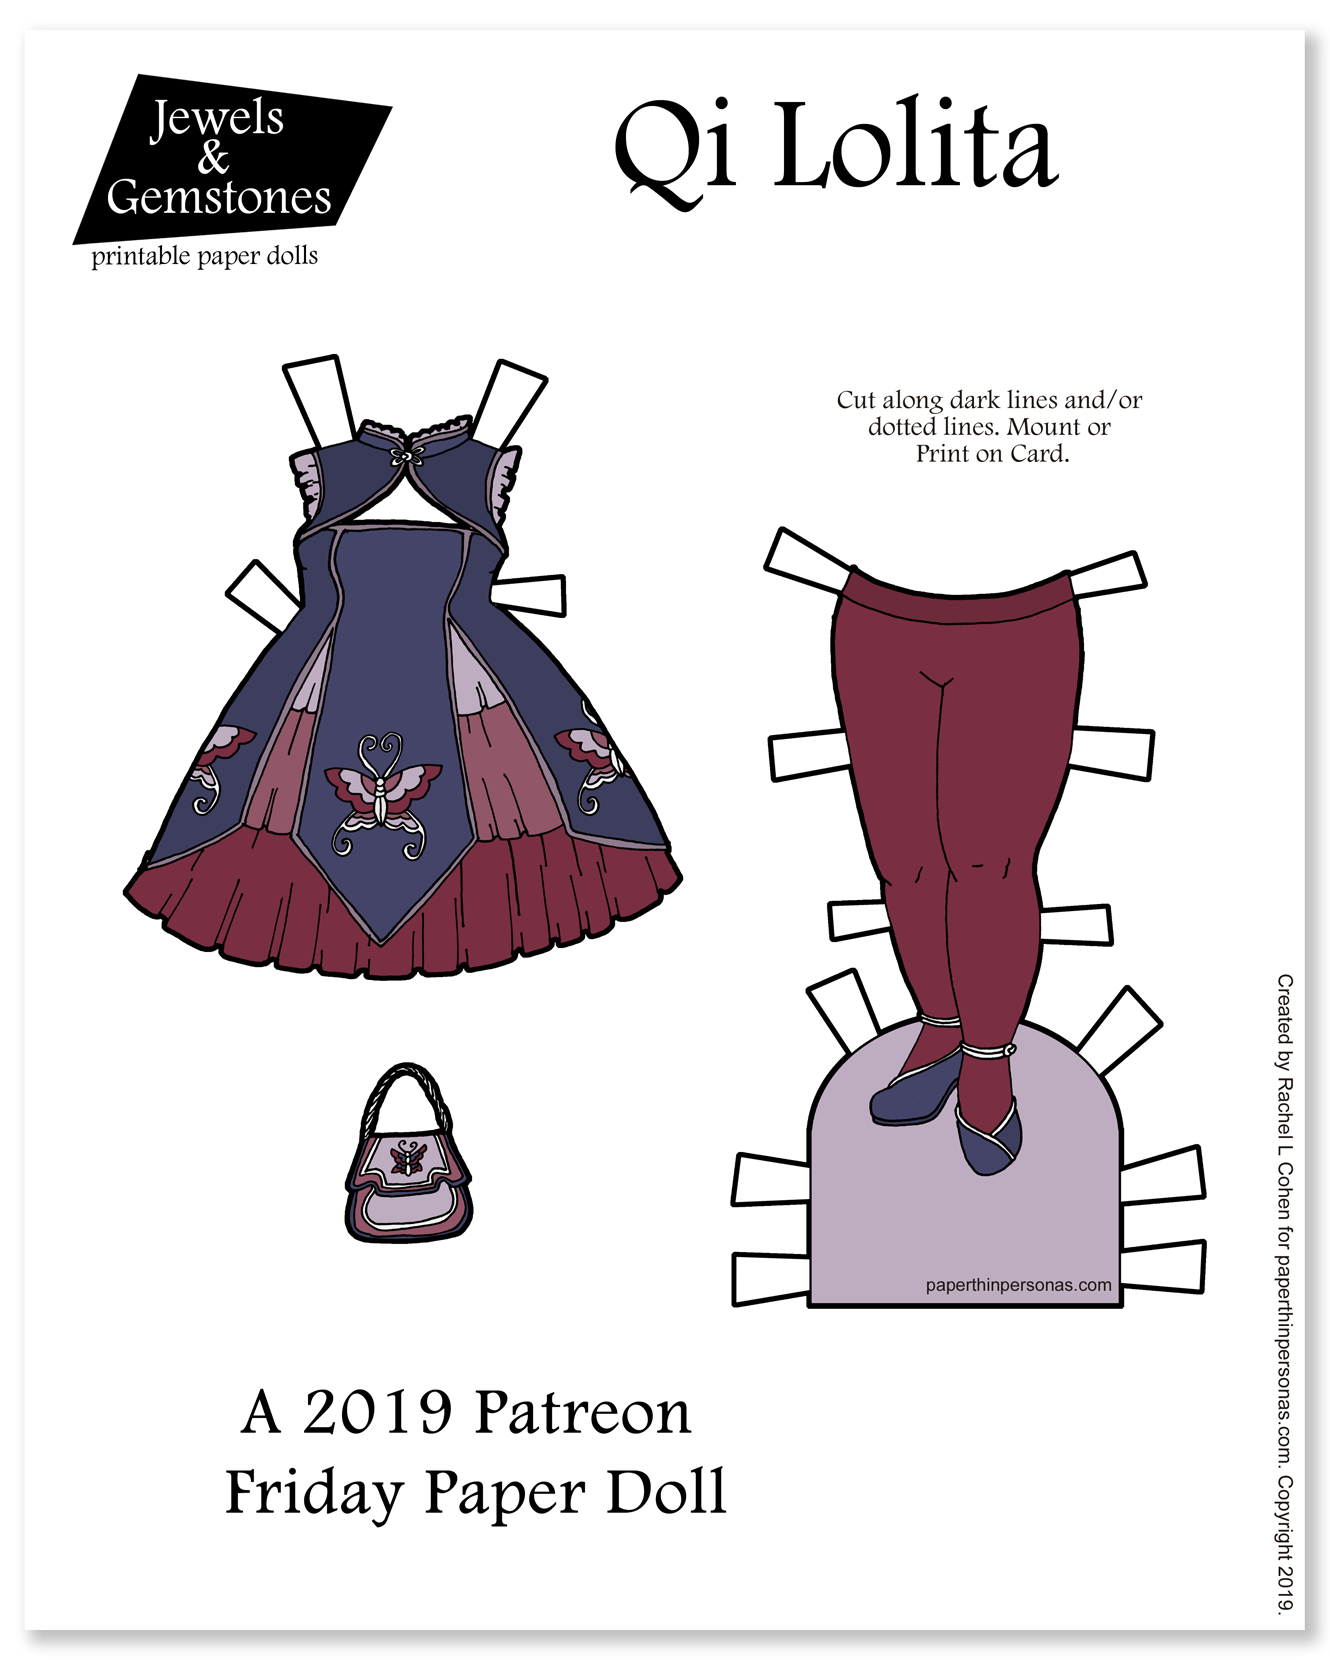 Chinese fashion brand: Lolita Dress based on Hanbok is written as kind of  Qilolita, which means Chinese style Lolita. : r/China